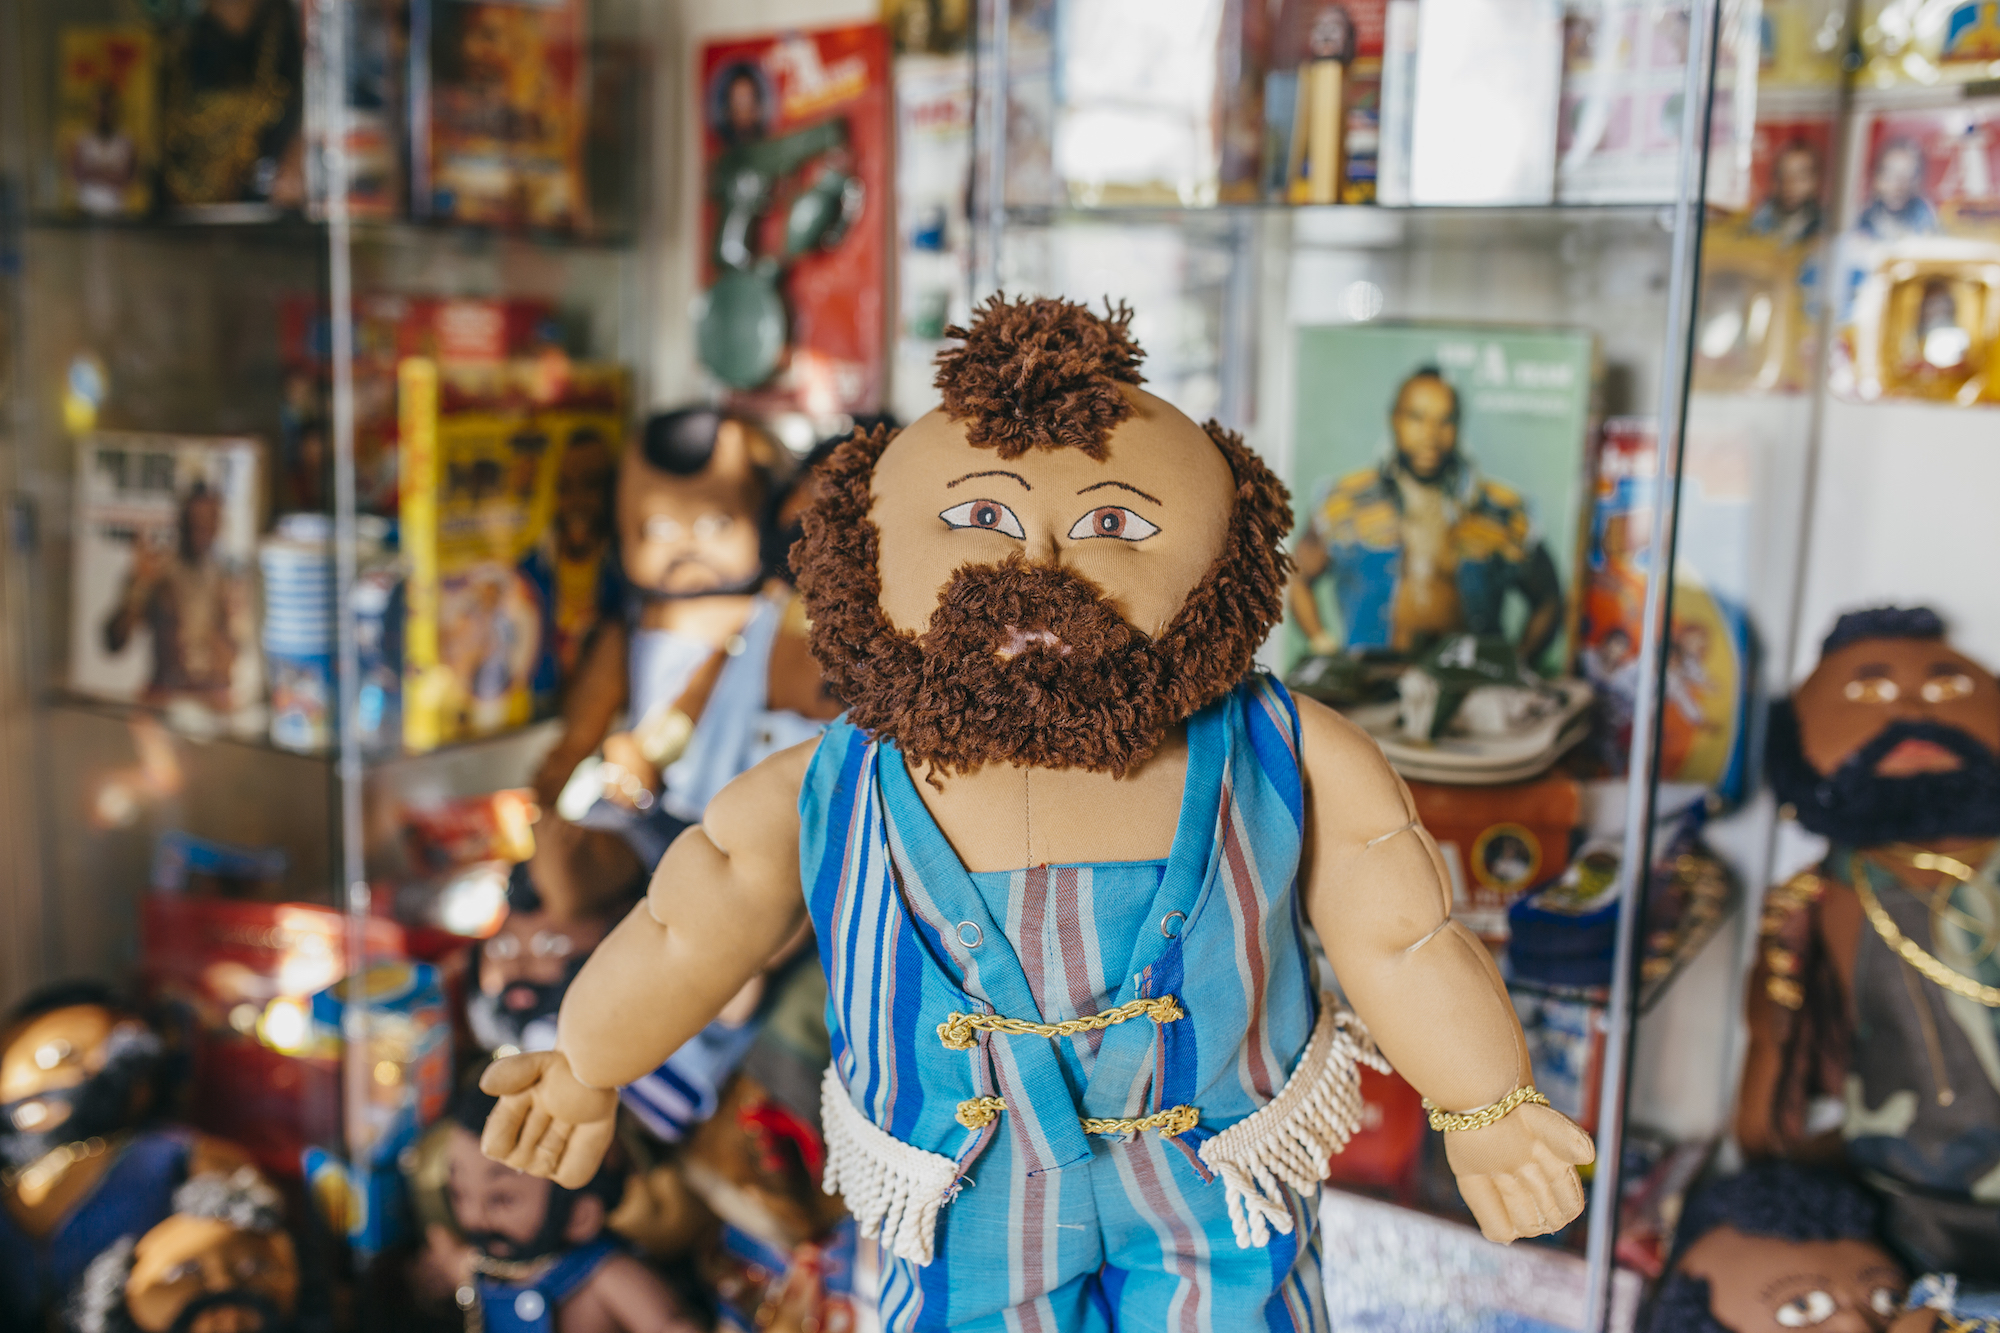 mr t cabbage patch doll